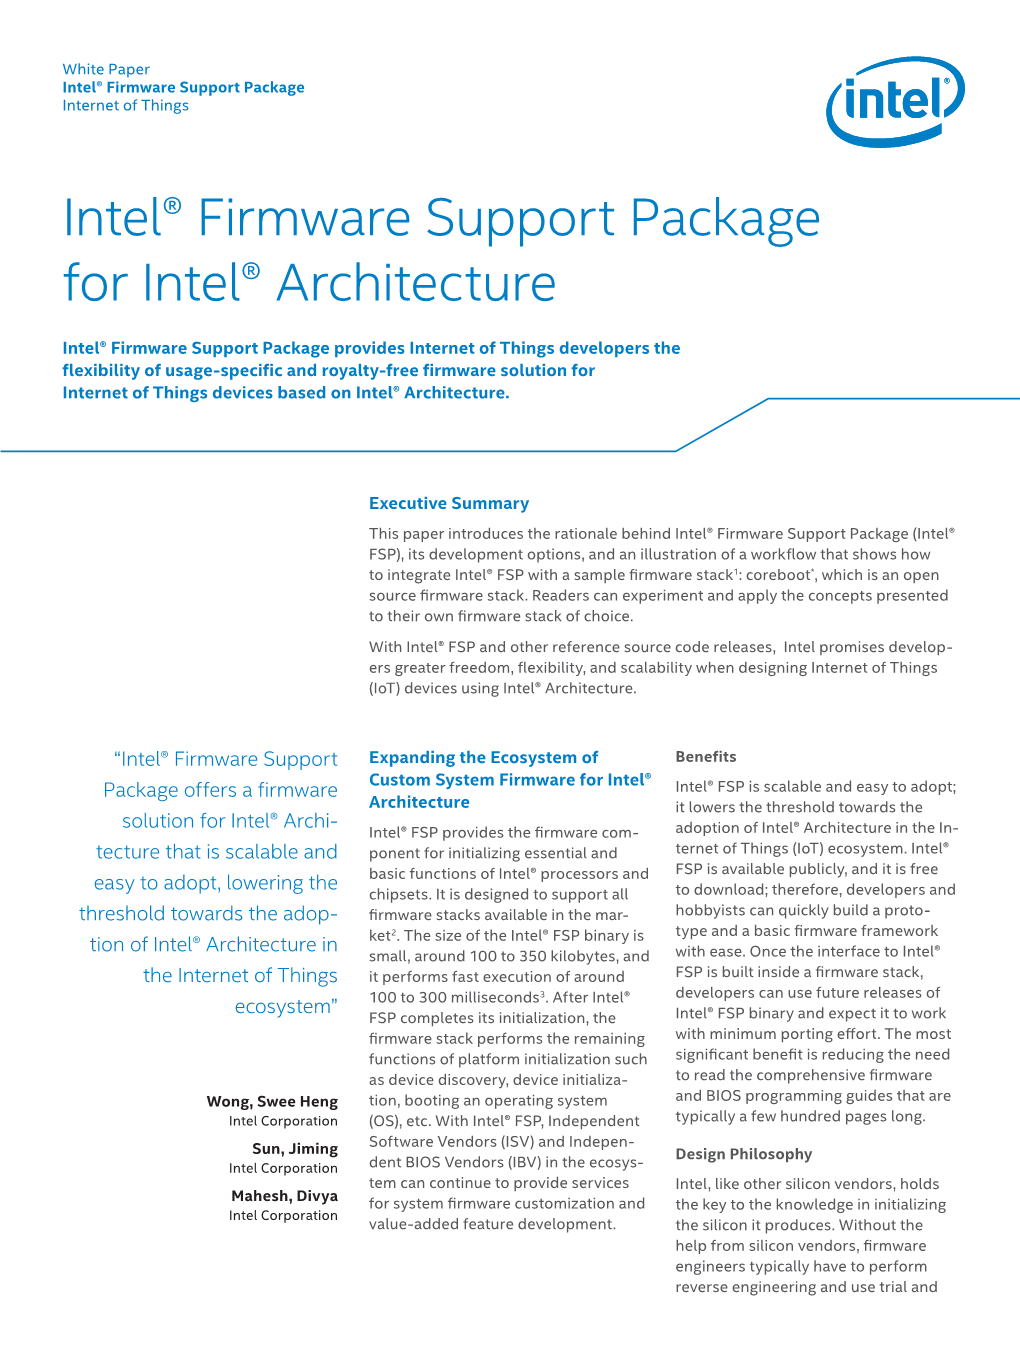 Intel® Firmware Support Package for Intel® Architecture